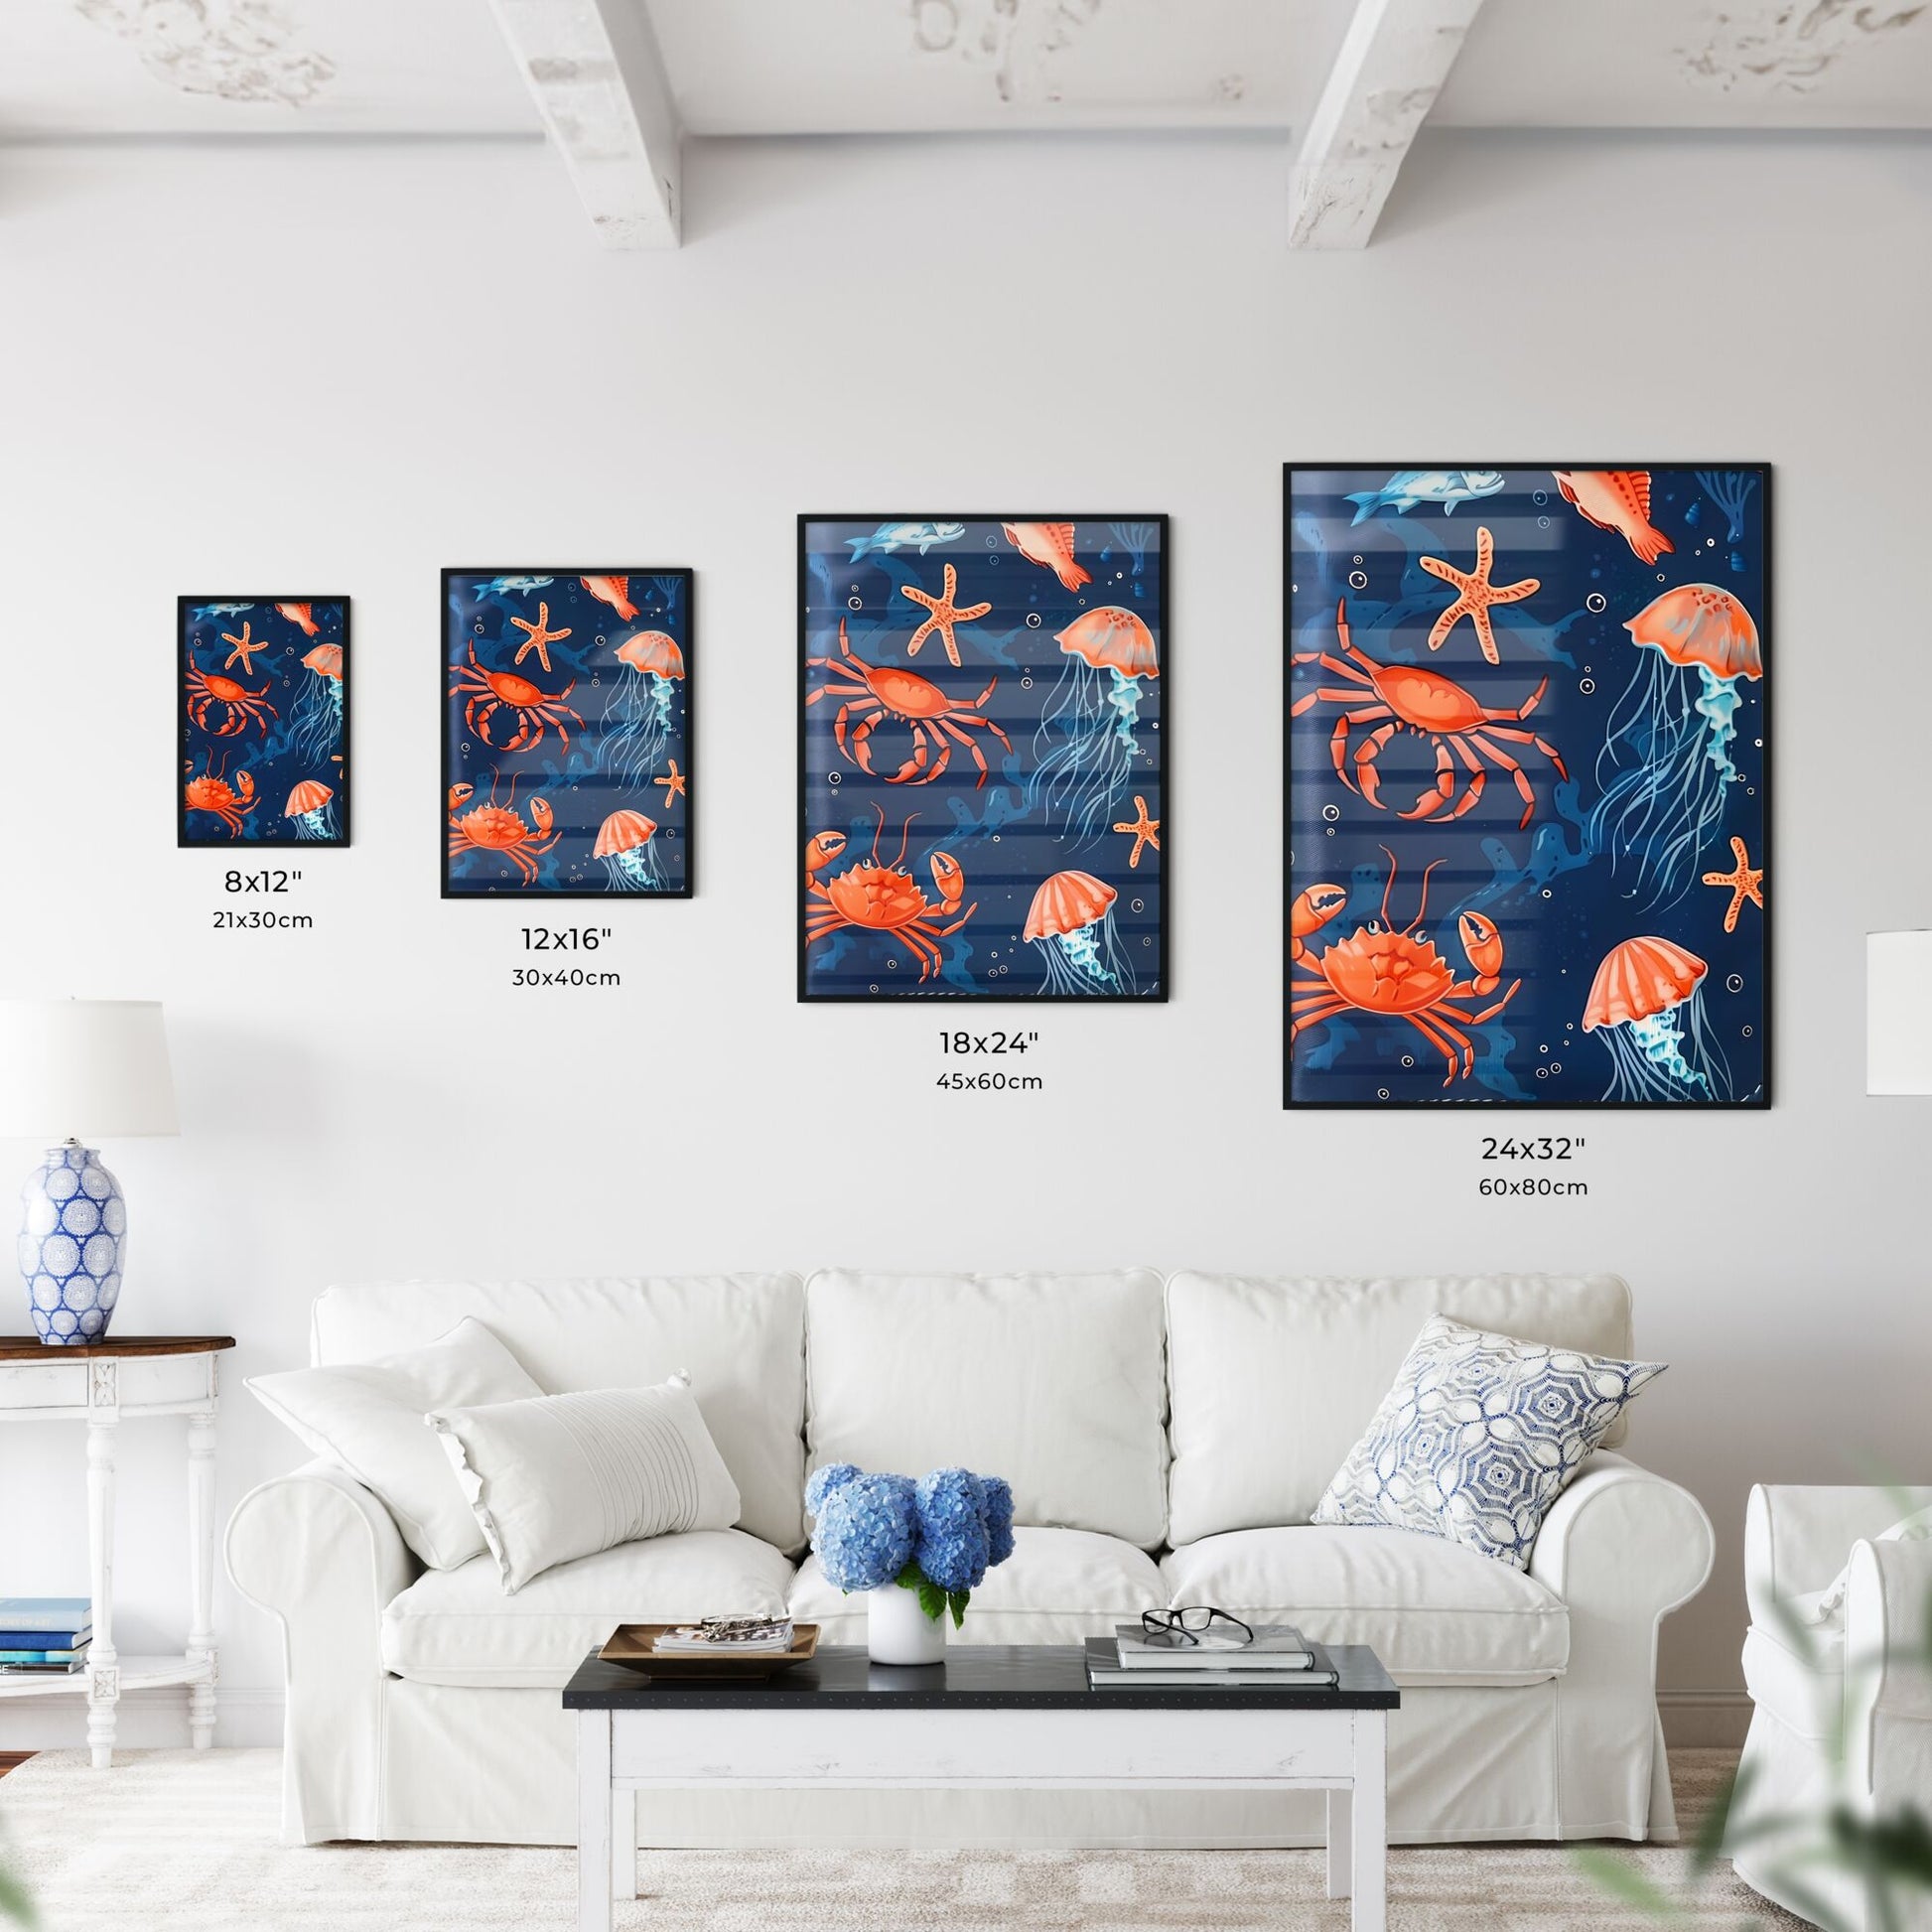 Vibrant Marine Canvas: Blue Ocean Hues Adorned with Playful Fish, Jellyfish, and Crabs Default Title